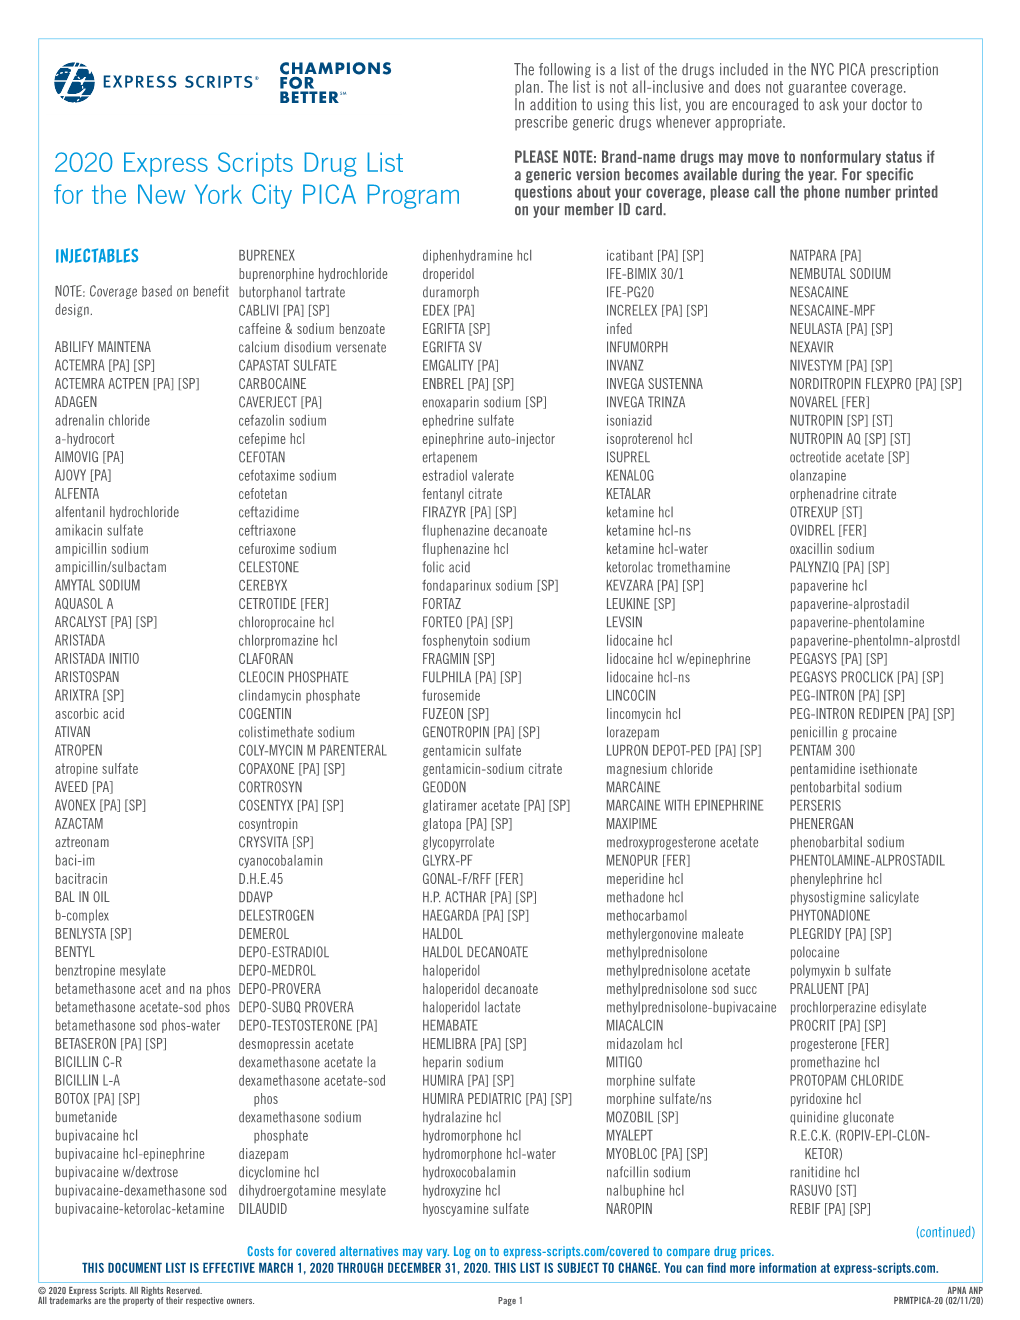 2020 Express Scripts Drug List for the NYC PICA Plan